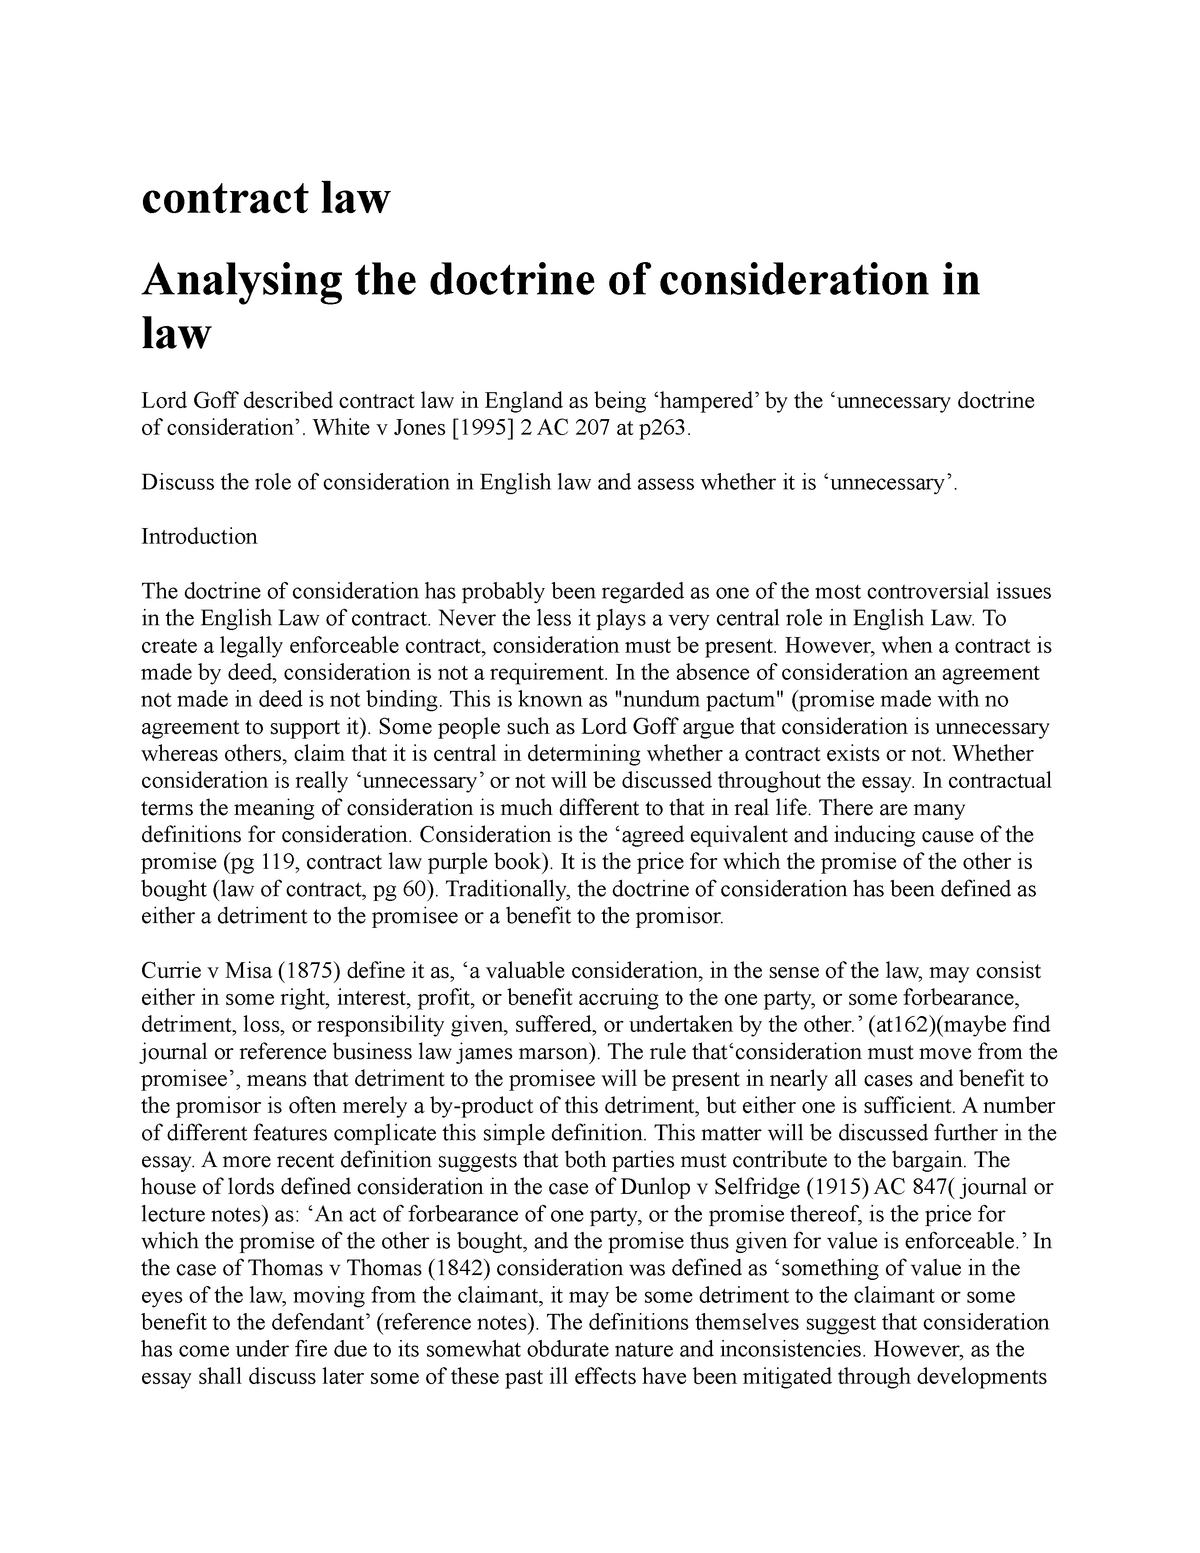 consideration in contract law essay